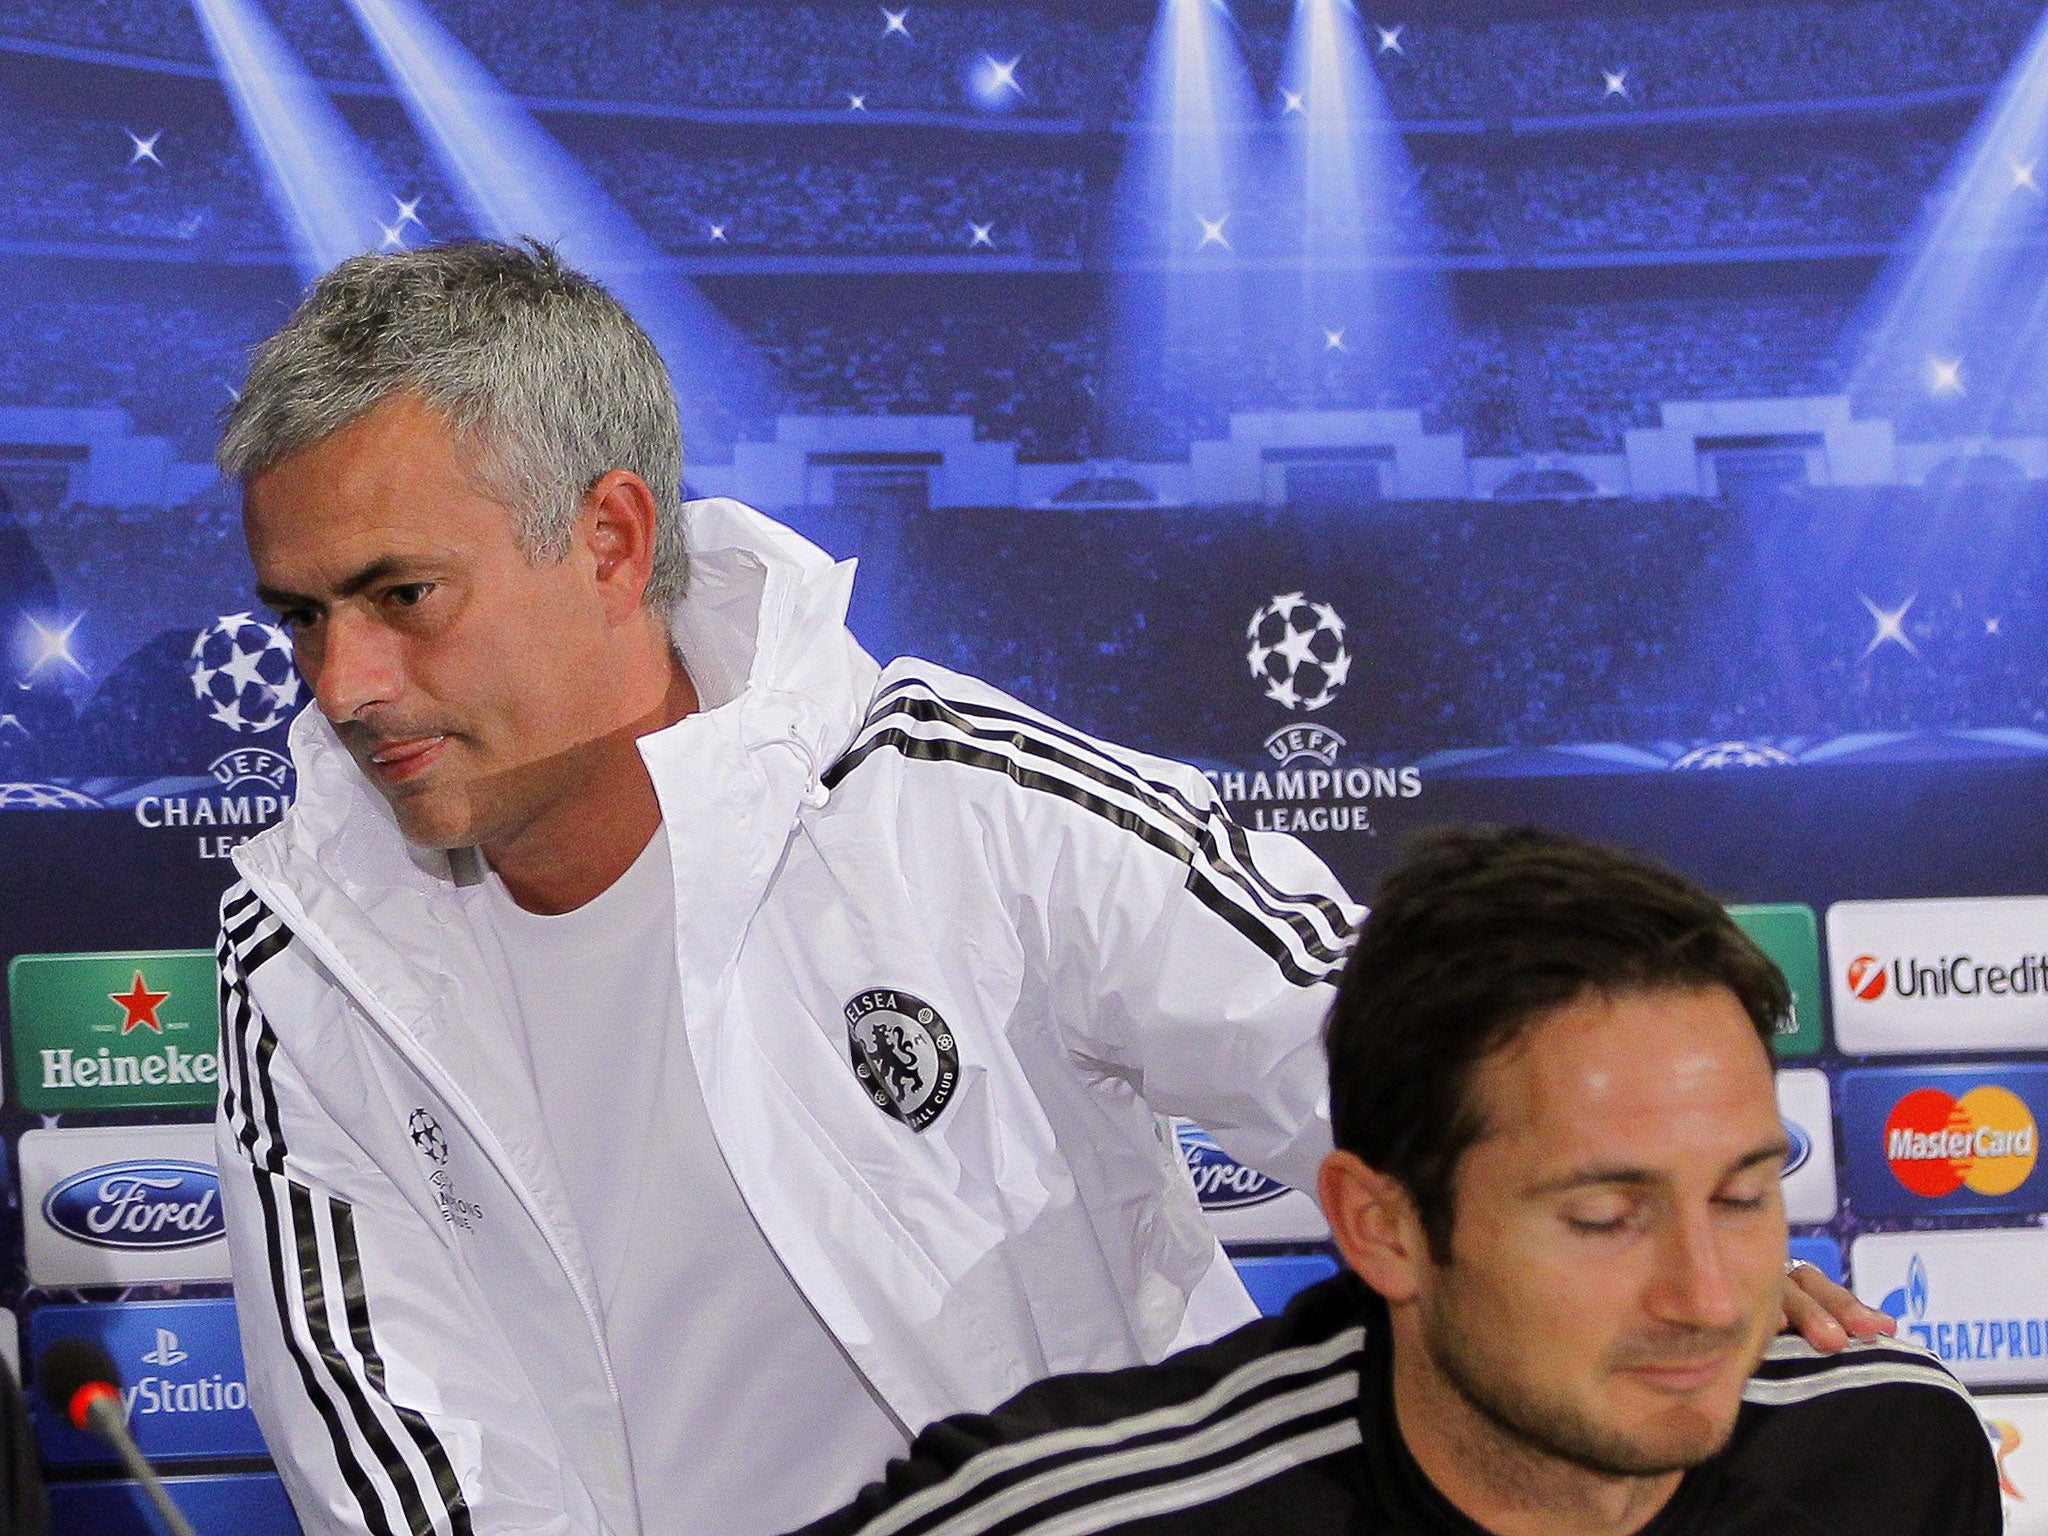 Jose Mourinho storms out of the Champions League press conference, leaving behind a bemused Frank Lampard